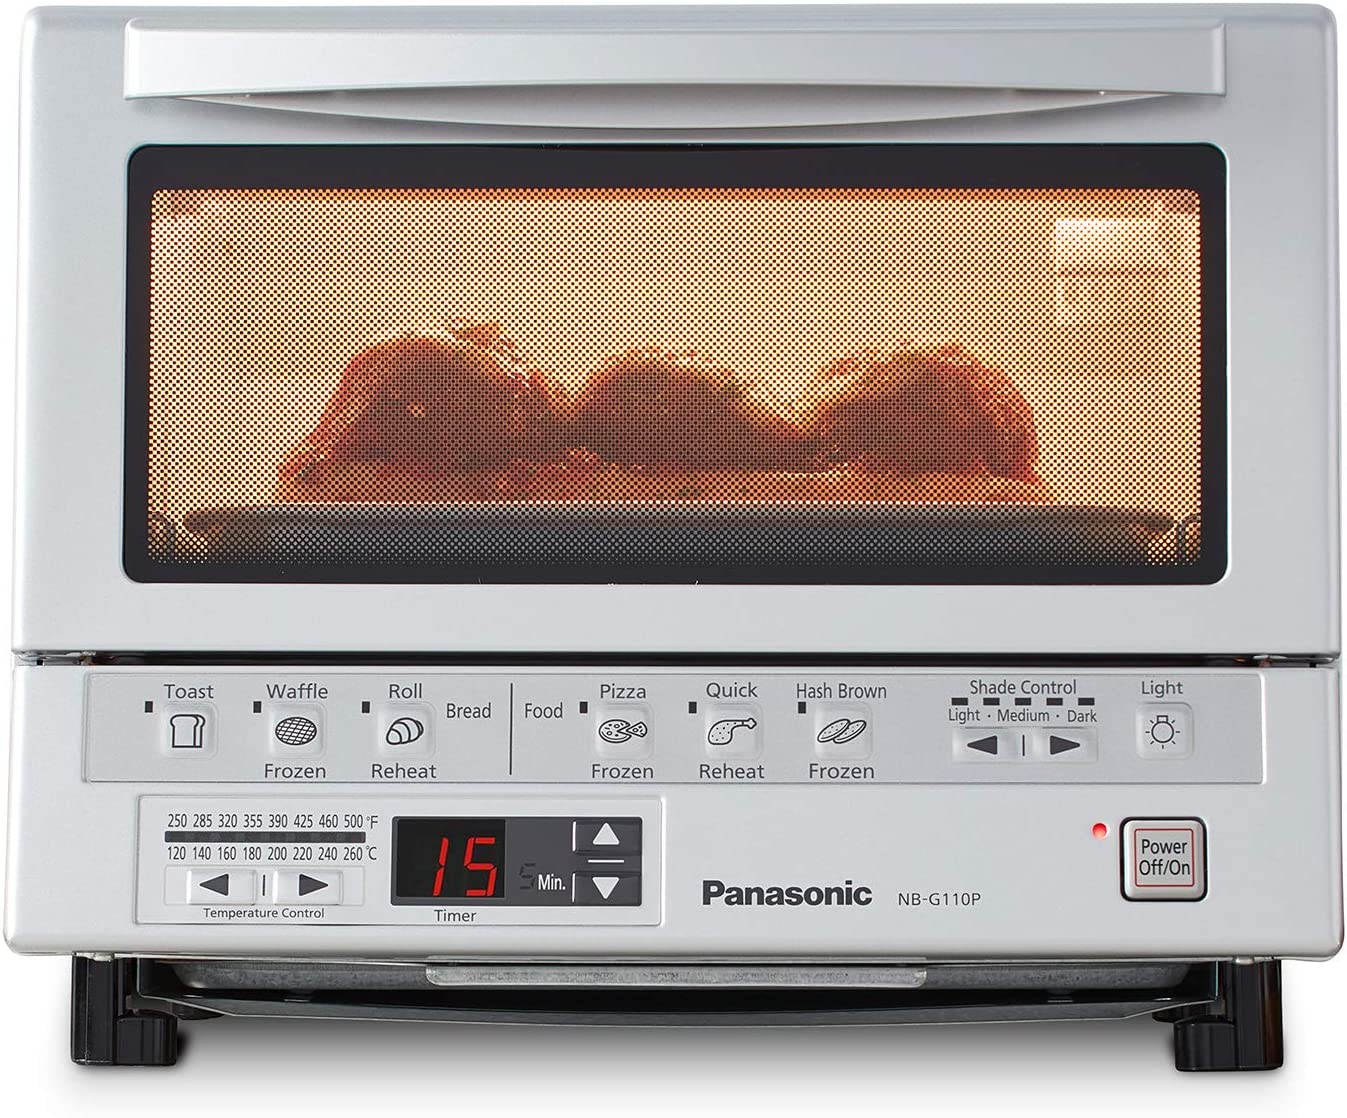 Breville-The Compact Smart Toaster Oven® & Reviews